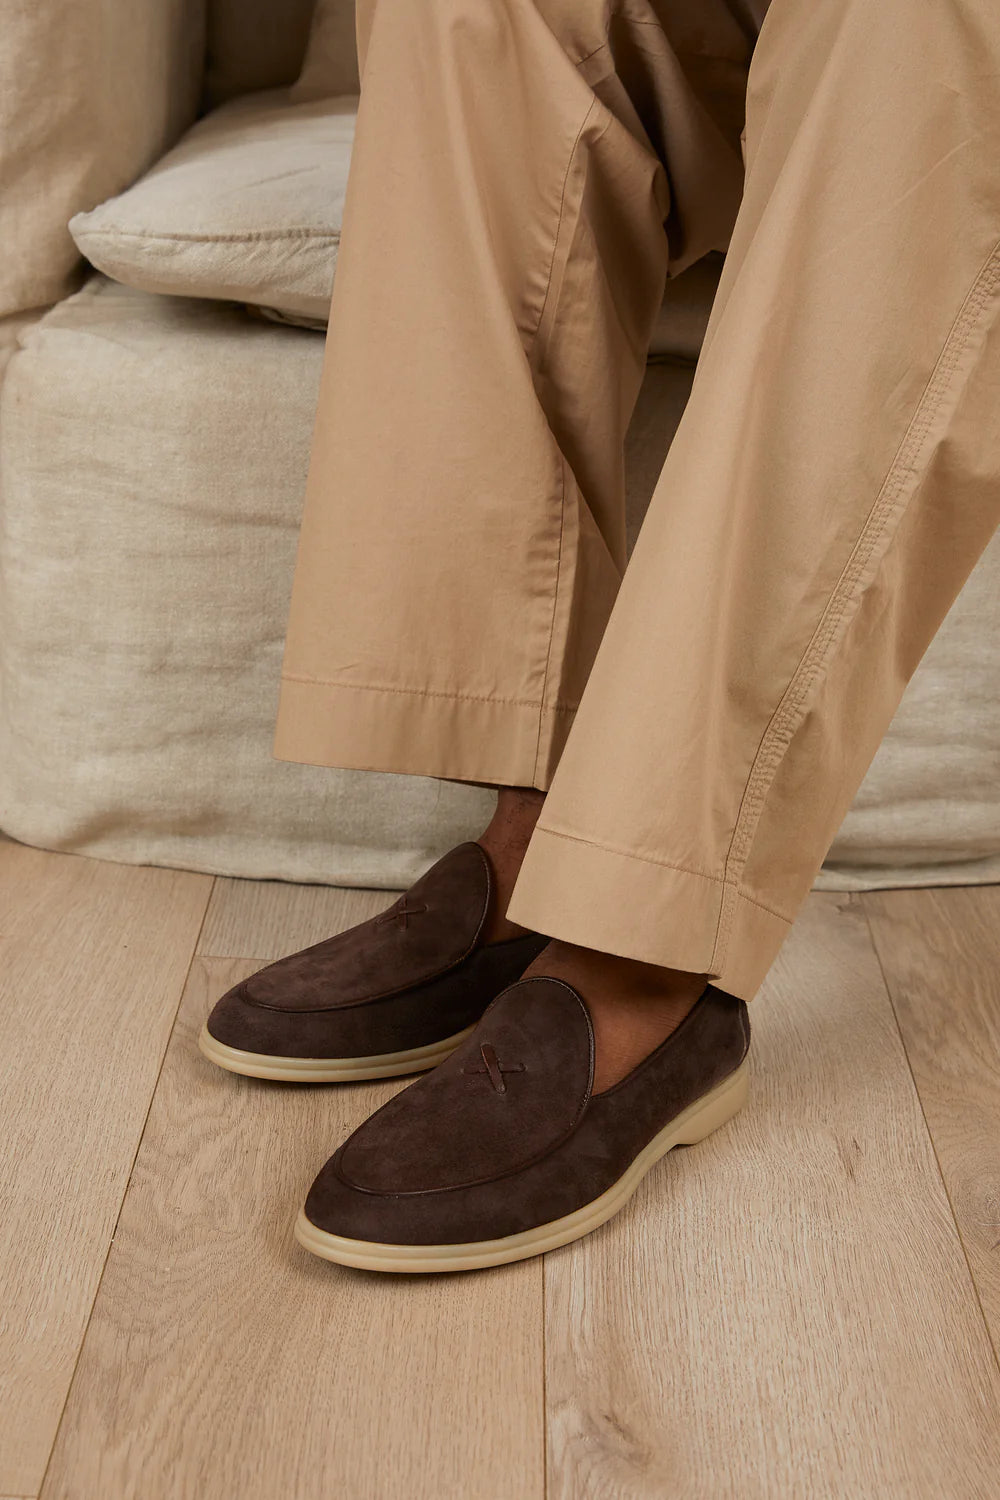 When to Wear Loafers